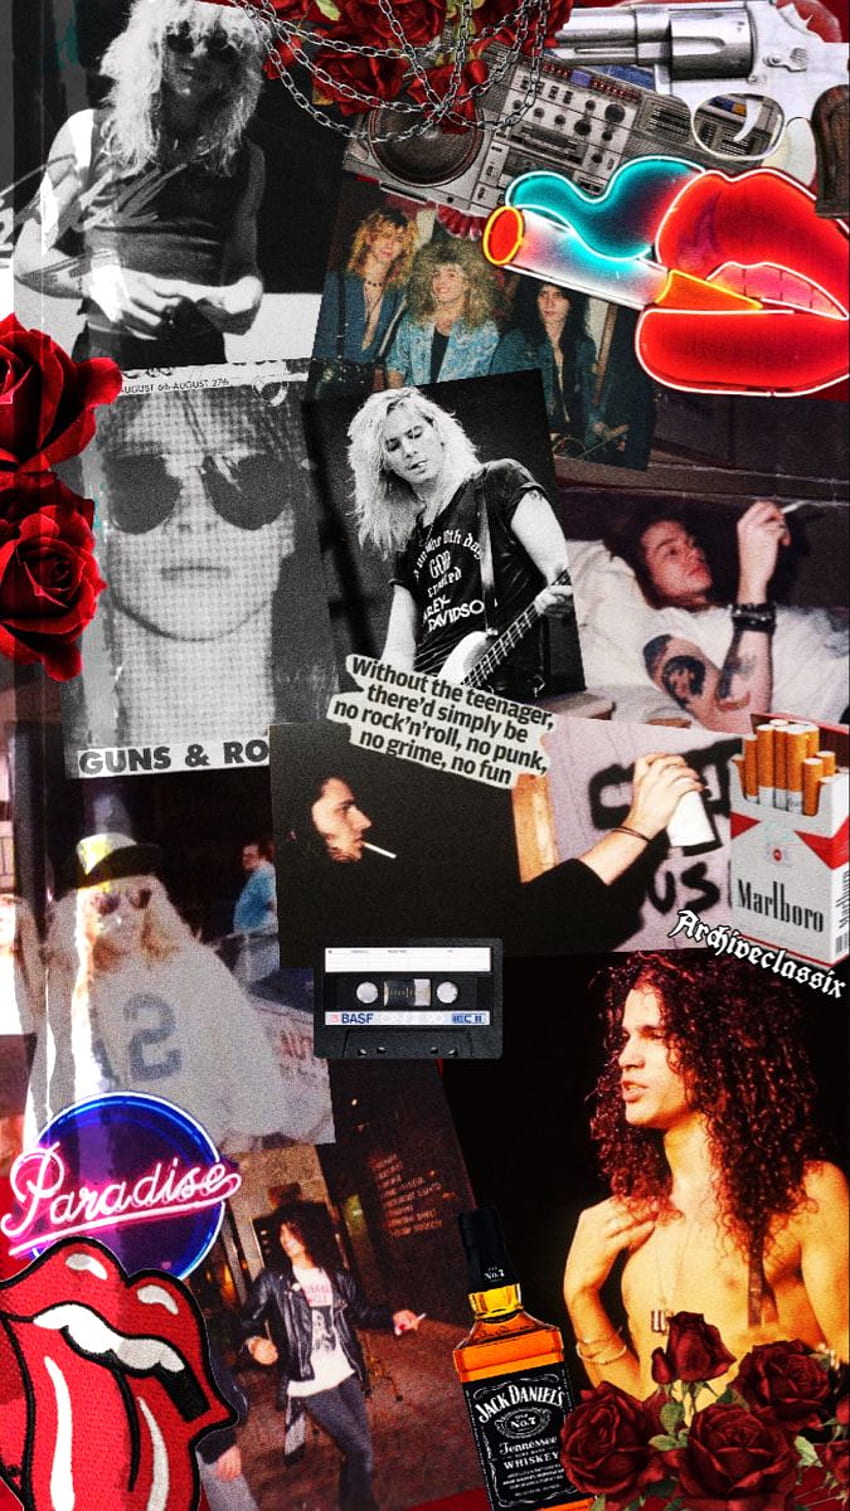 A collage of 80s rock bands, Guns N' Roses, and other rock and roll symbols - Rock, punk